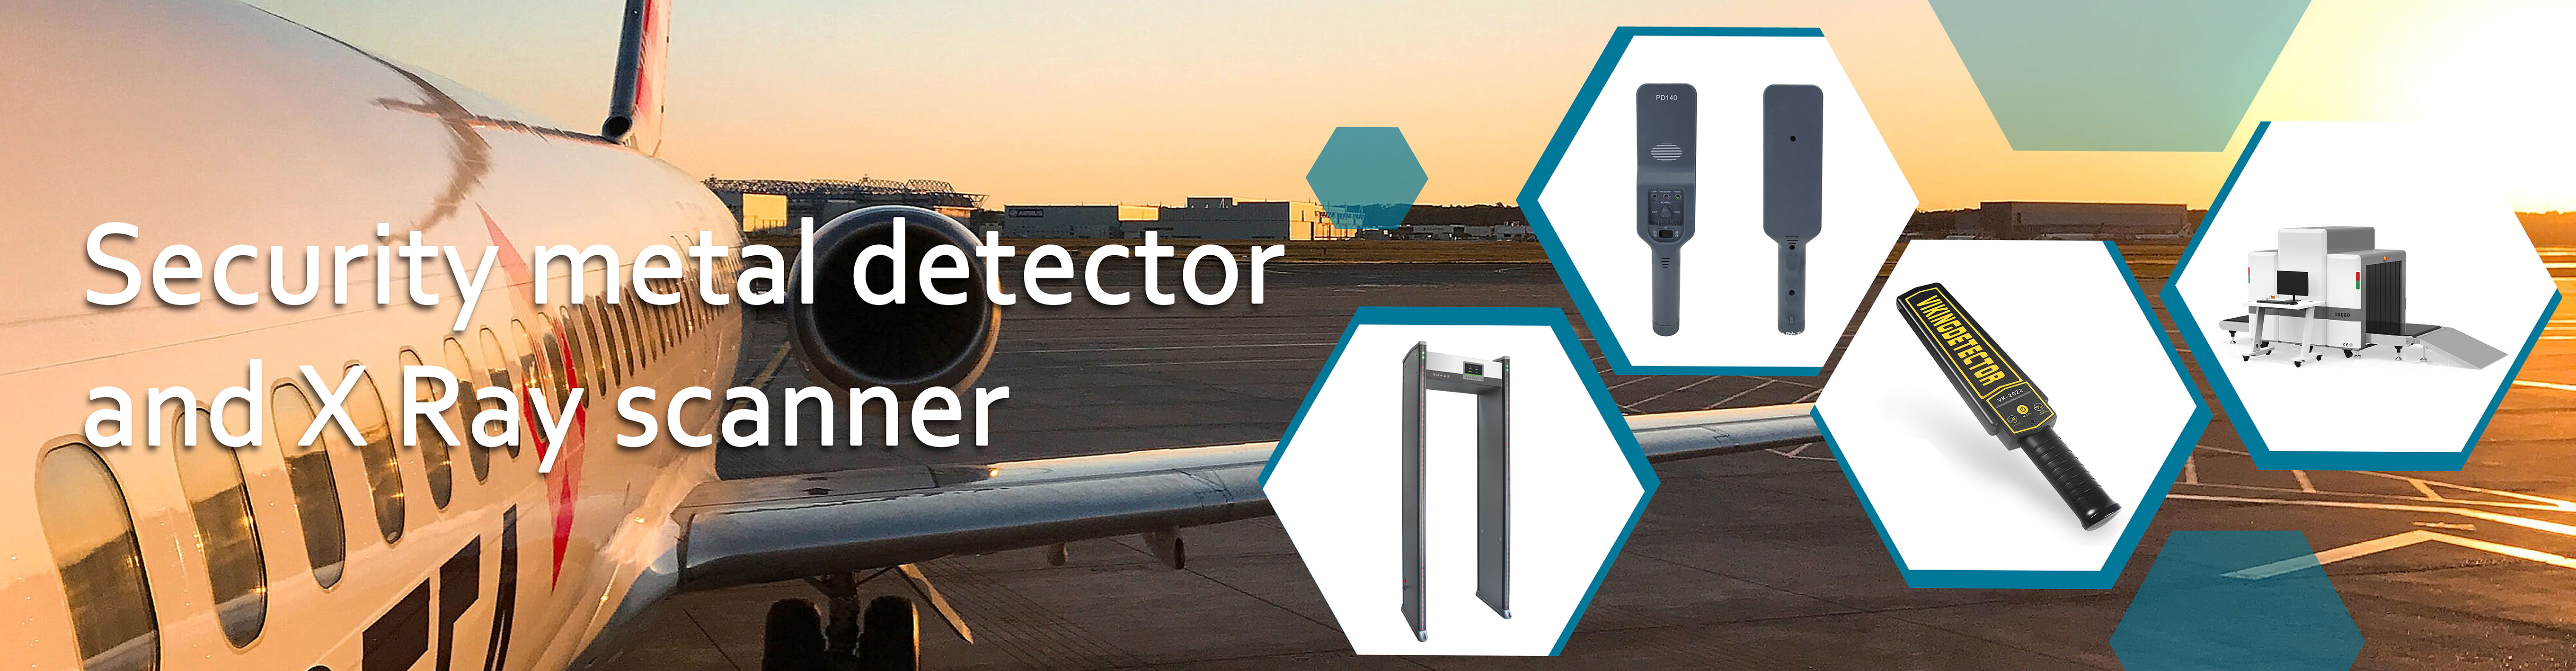 security metal detector and x ray scanner